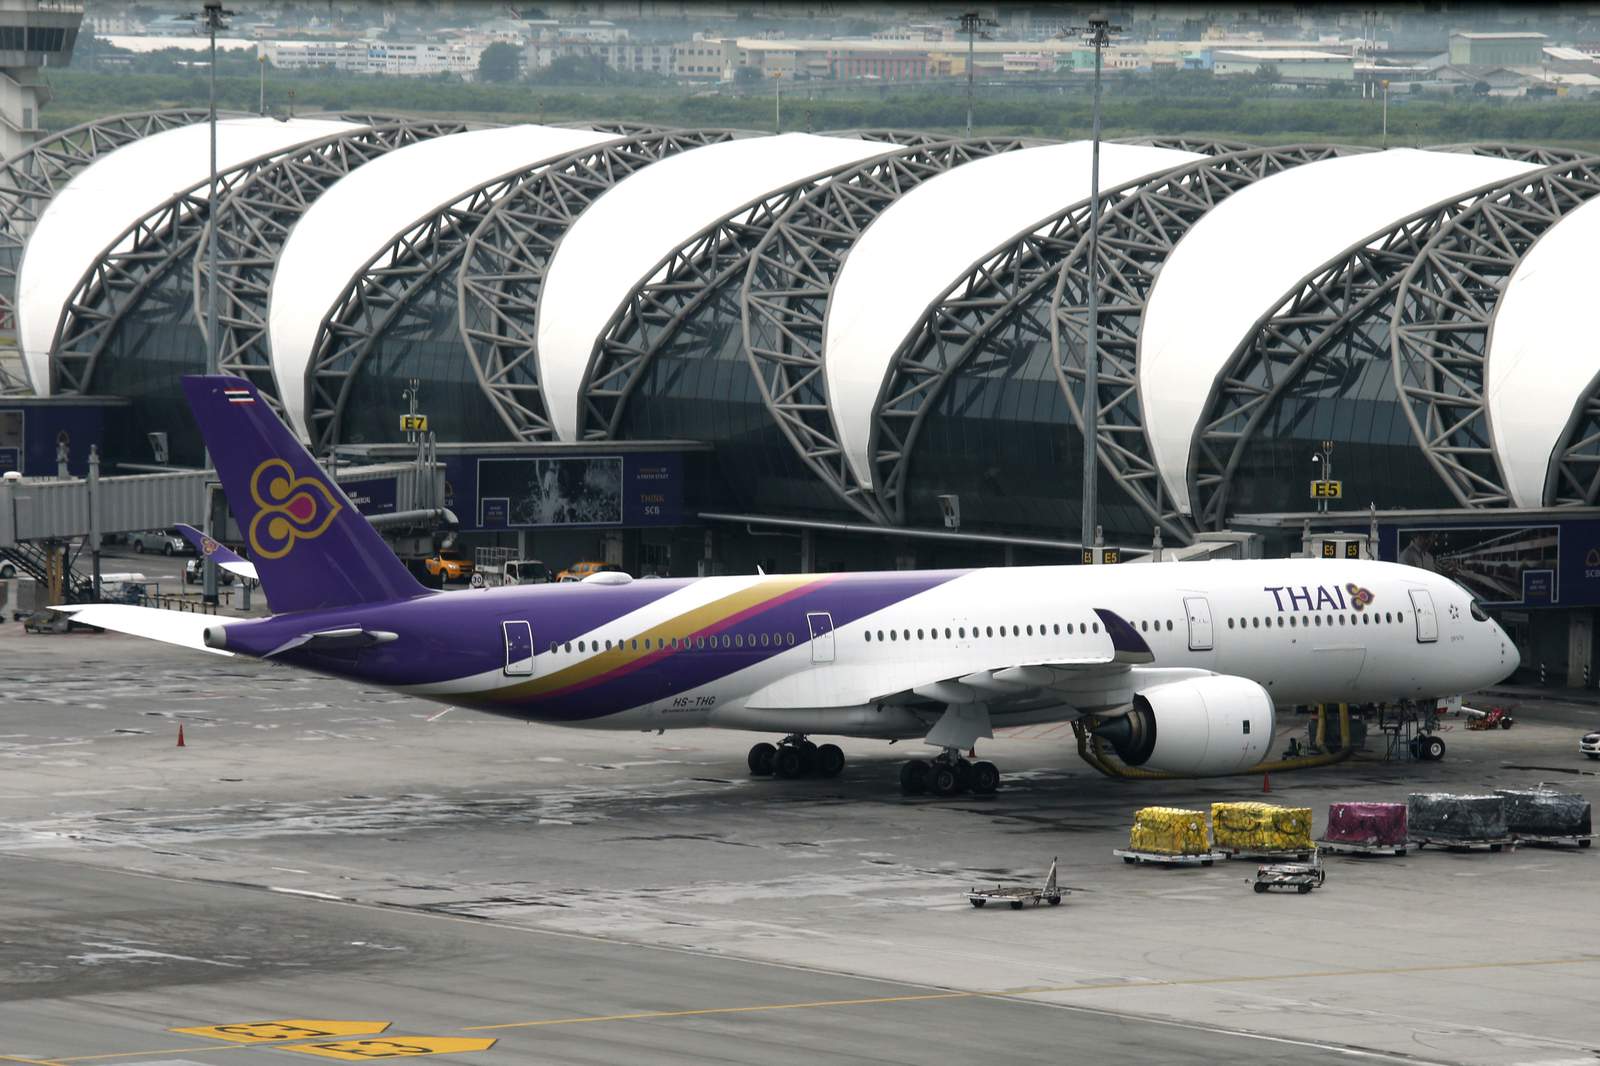 Cash strapped Thai Airways to seek bankruptcy rehabilitation